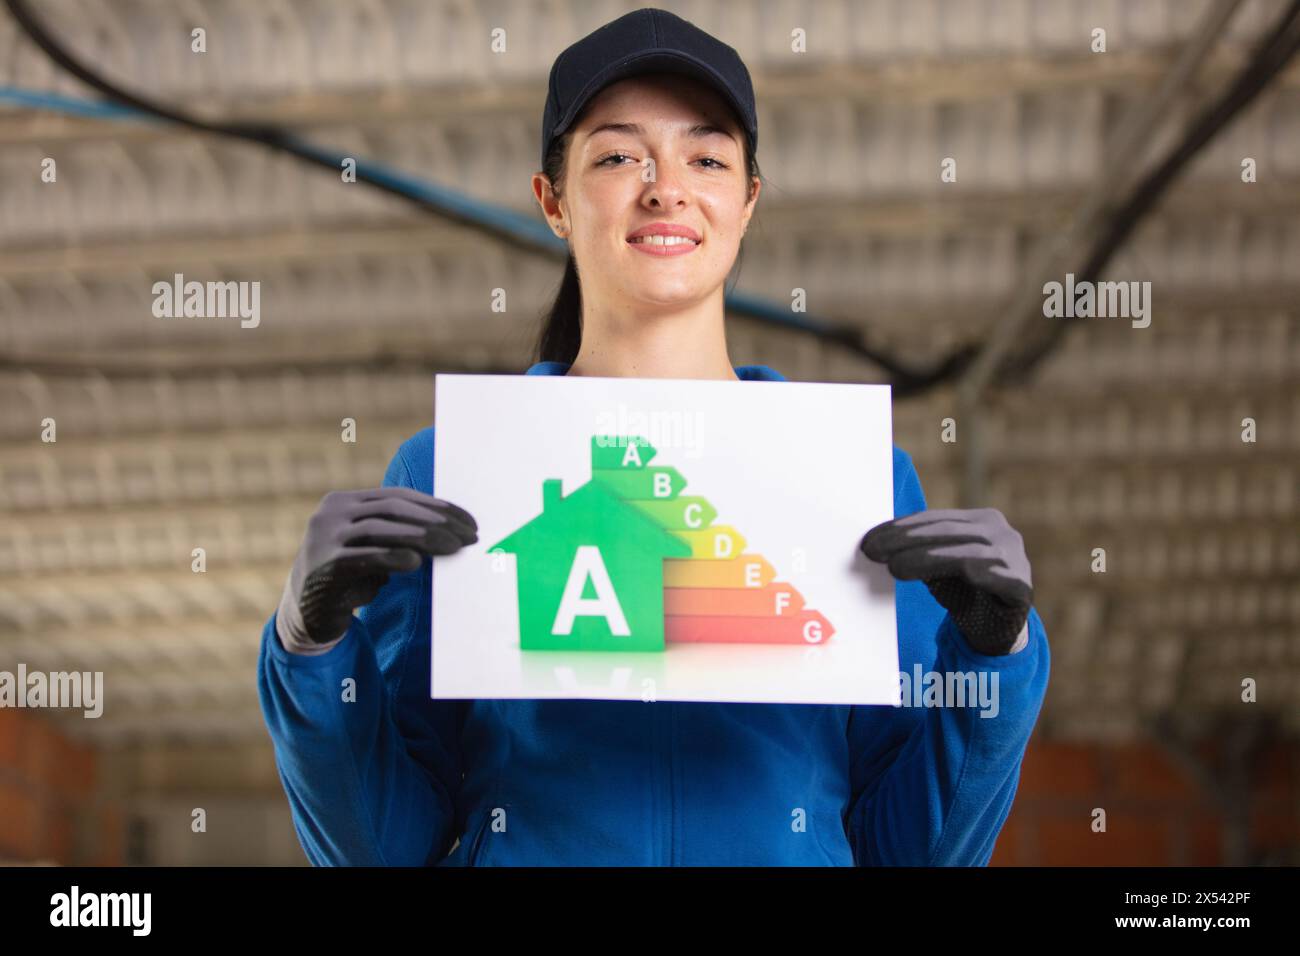 female construction site engineer holding energy building board Stock Photo